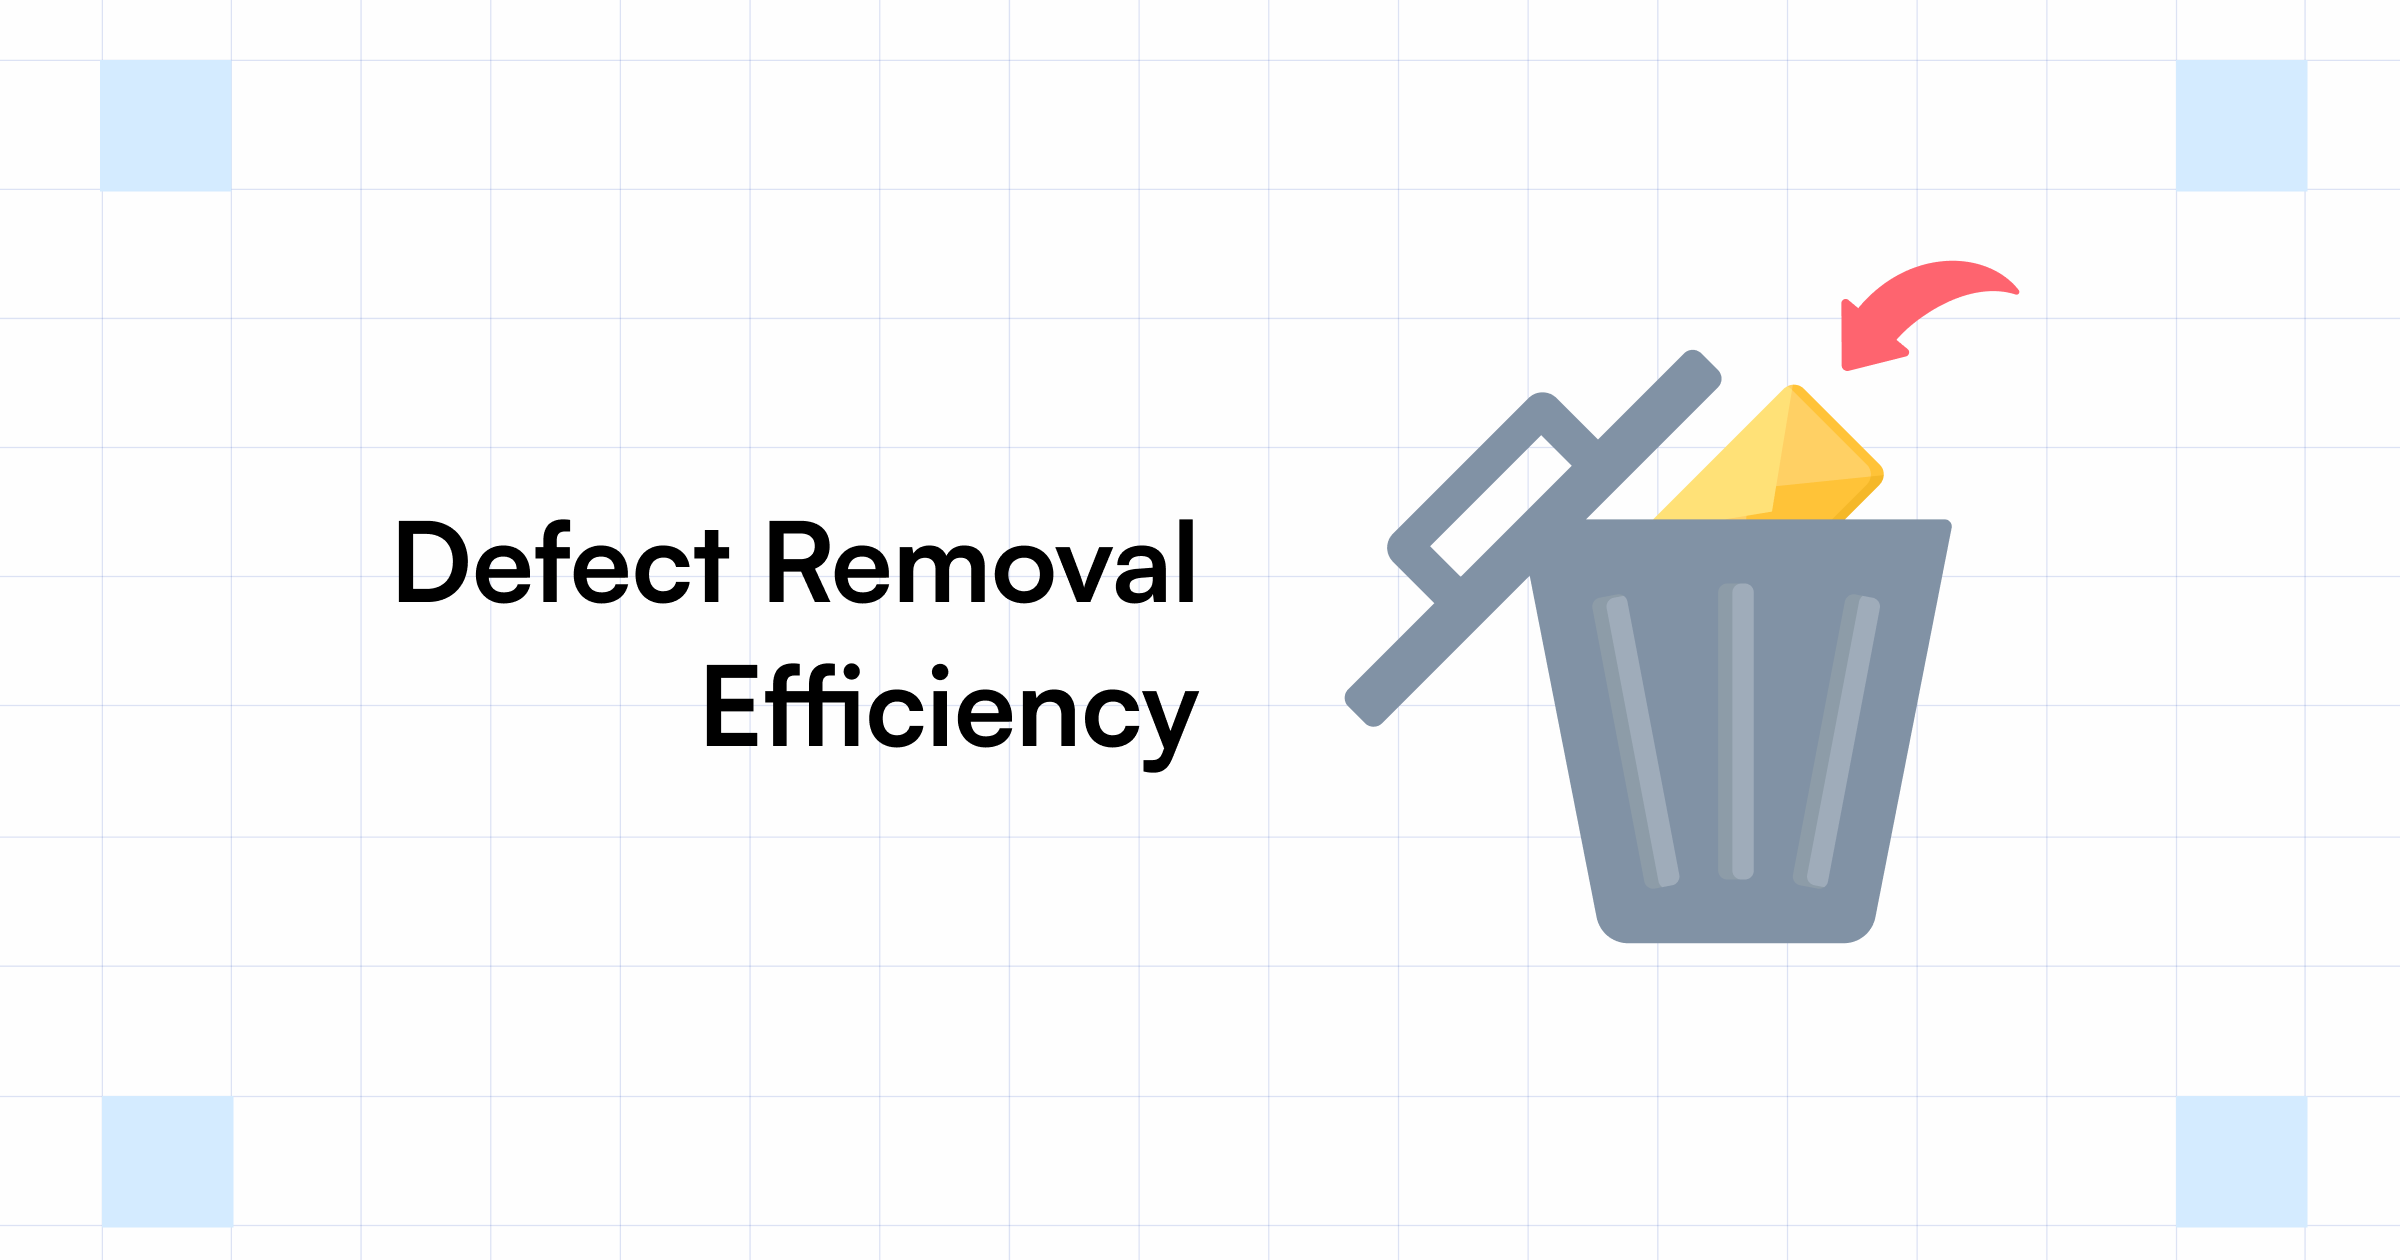 Defect Removal Efficiency How To Calculate It For Test Automation